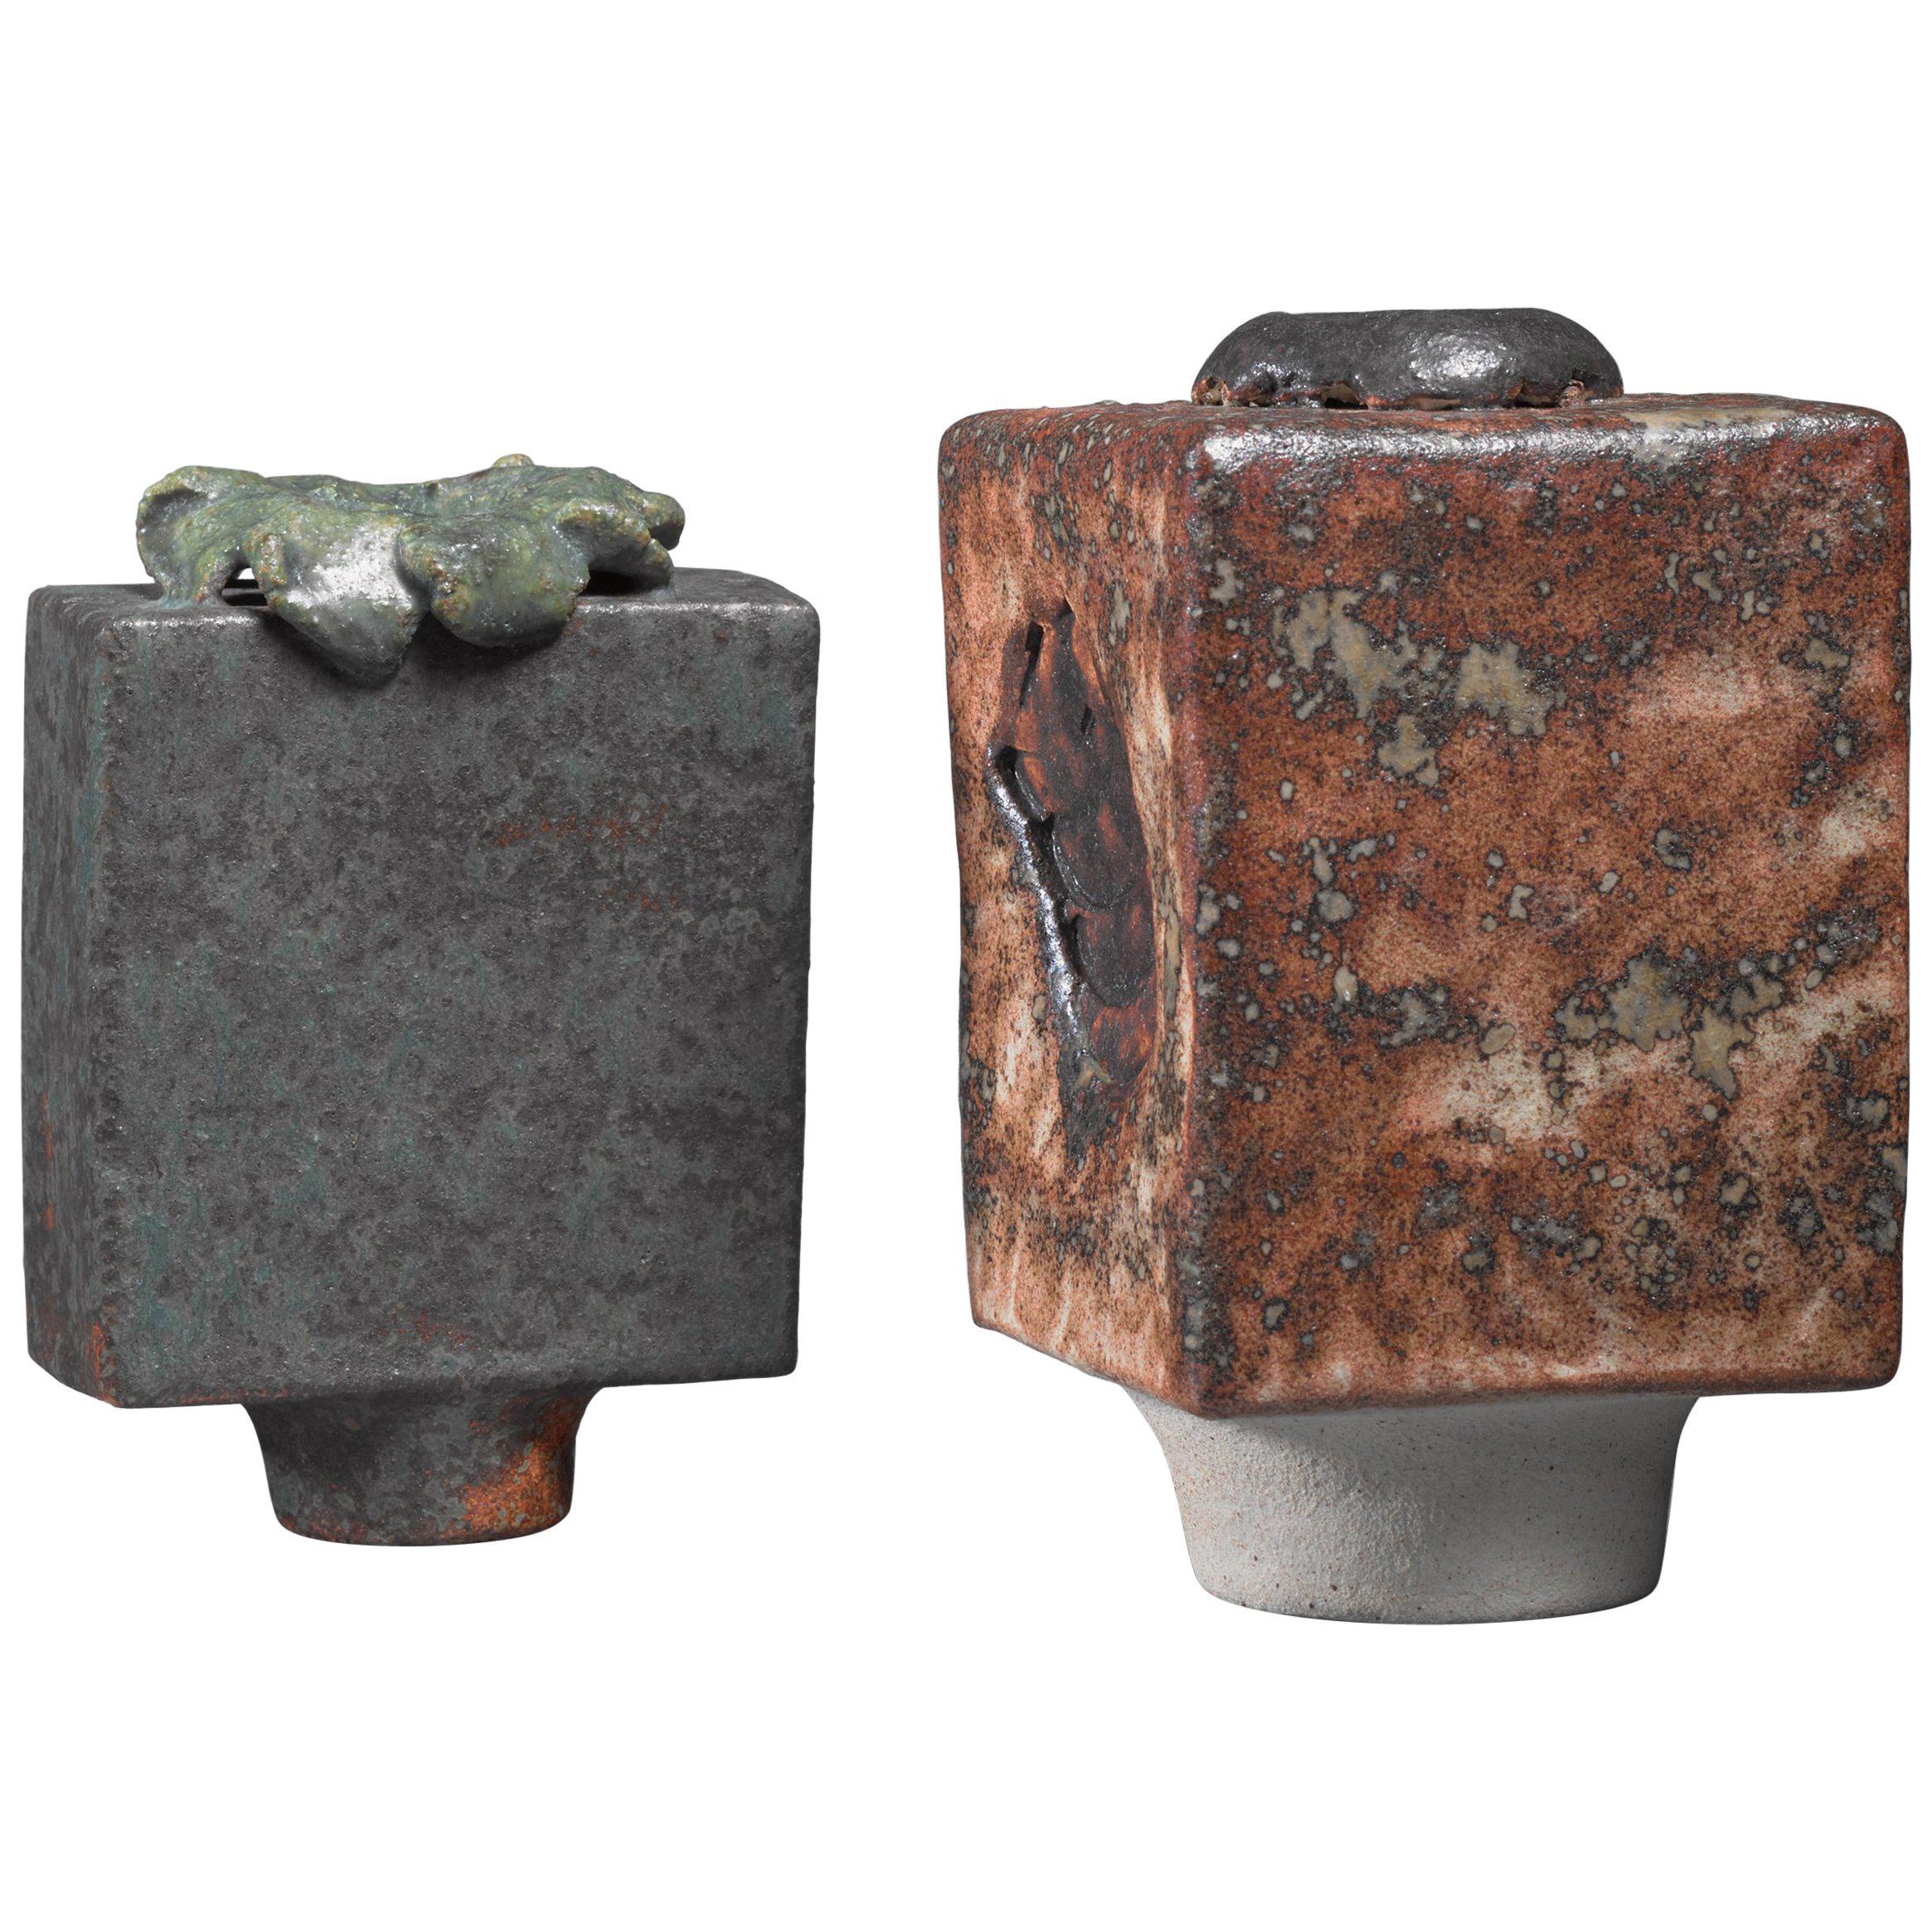 Lotte Reimers Pair of Ceramic Vases, Germany, 1970s For Sale